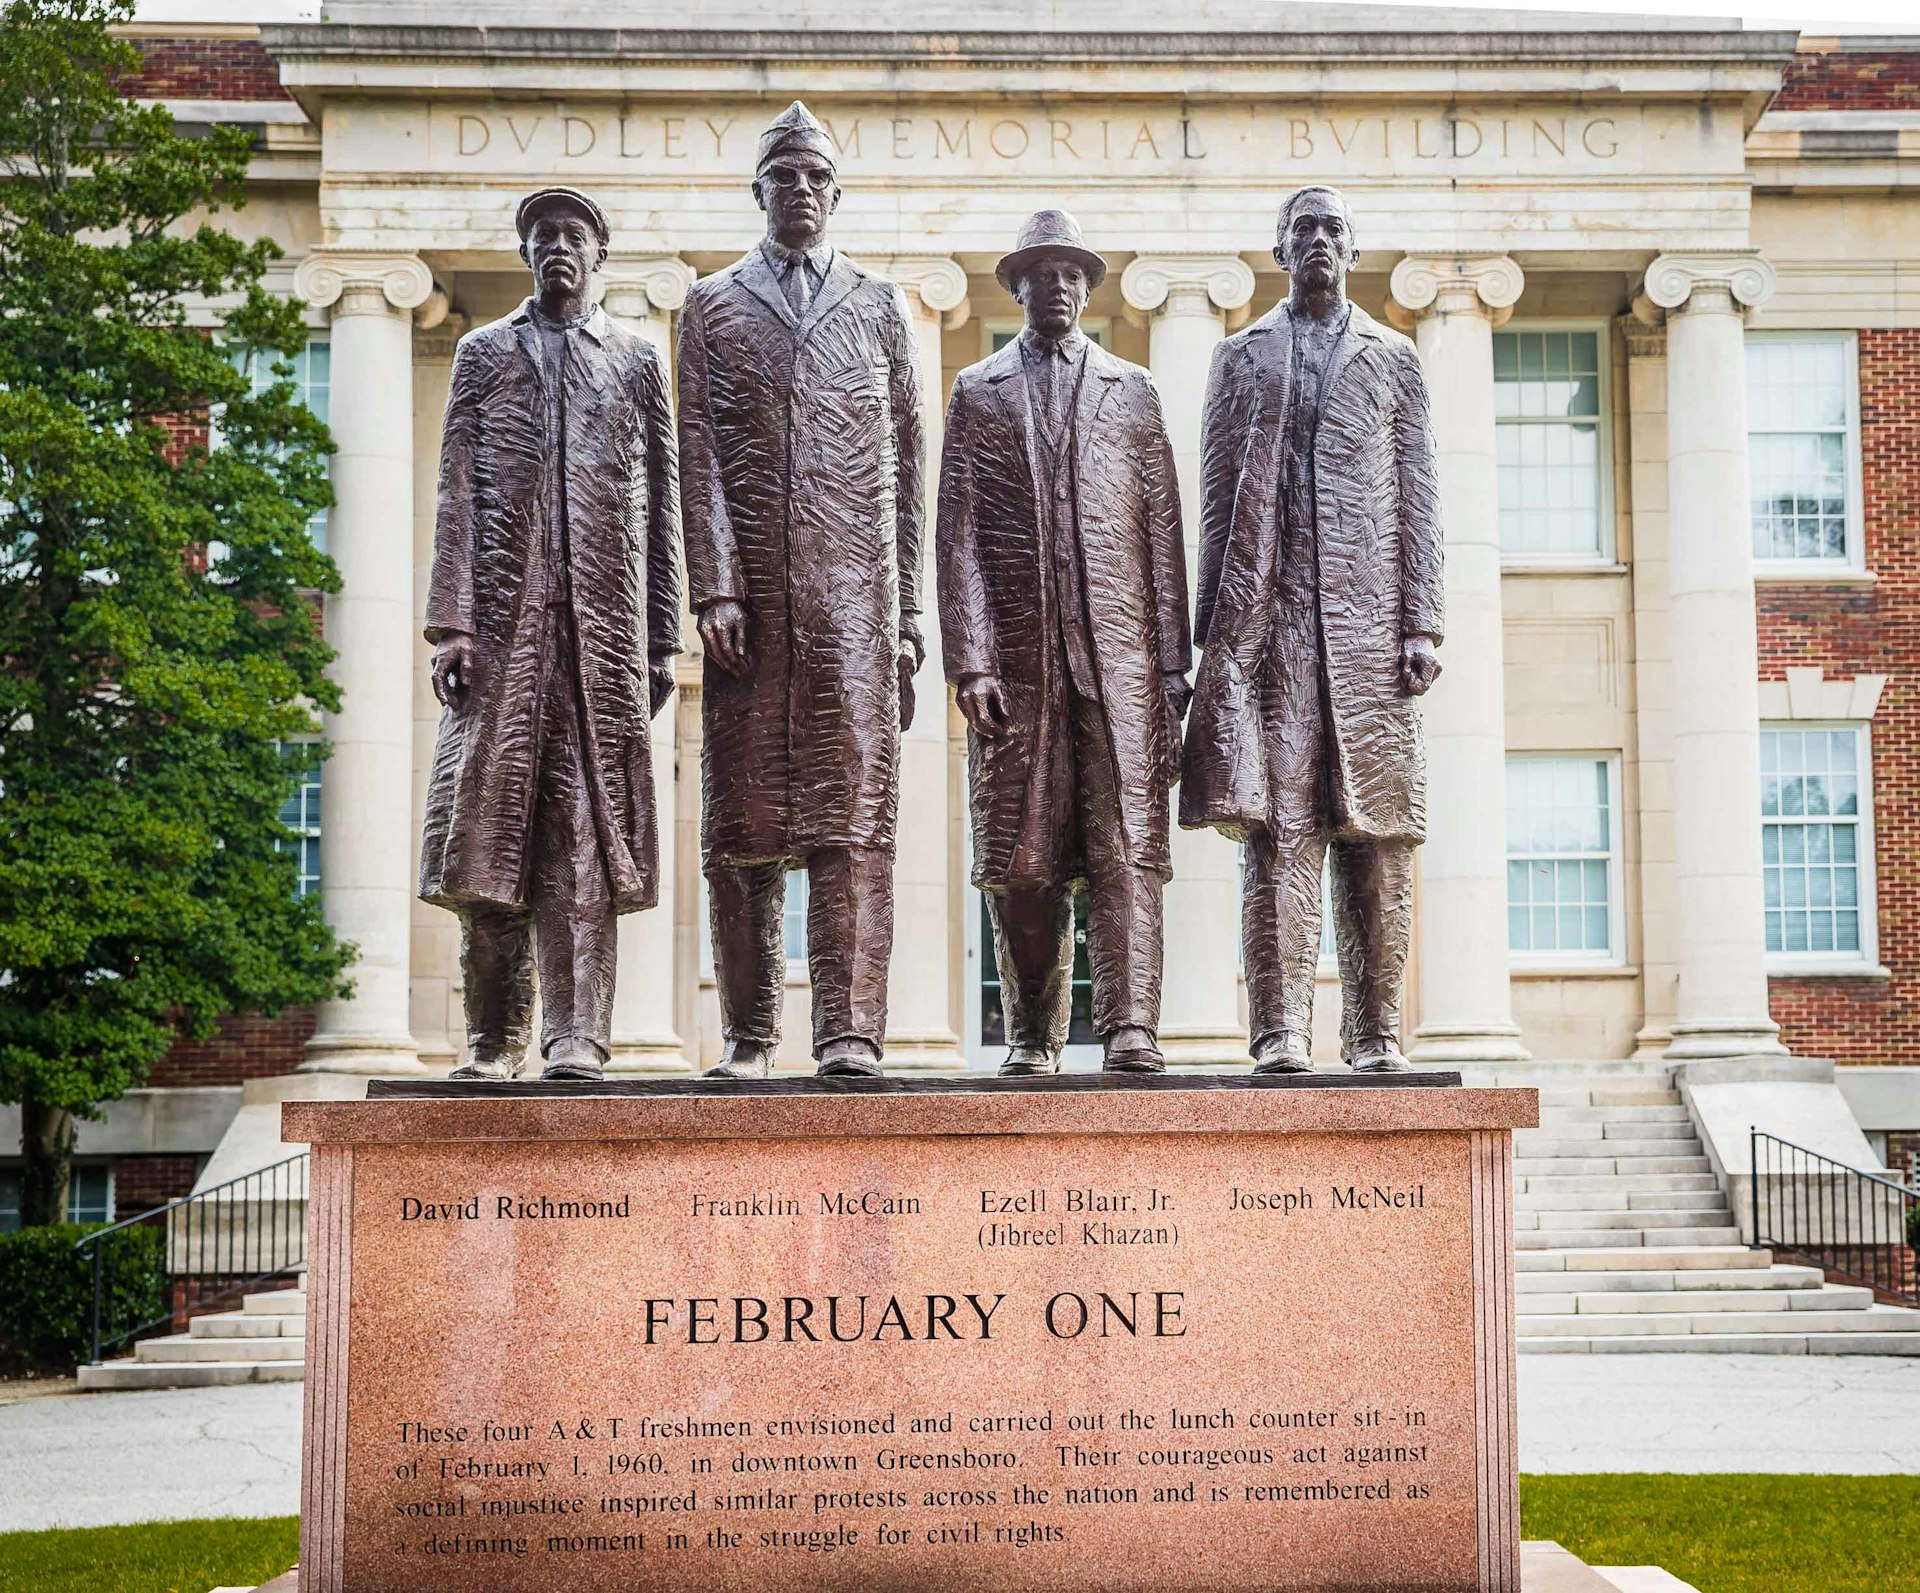 A statue of the Greensboro Four outside the Dudley Memorial Building on North Carolina A&T